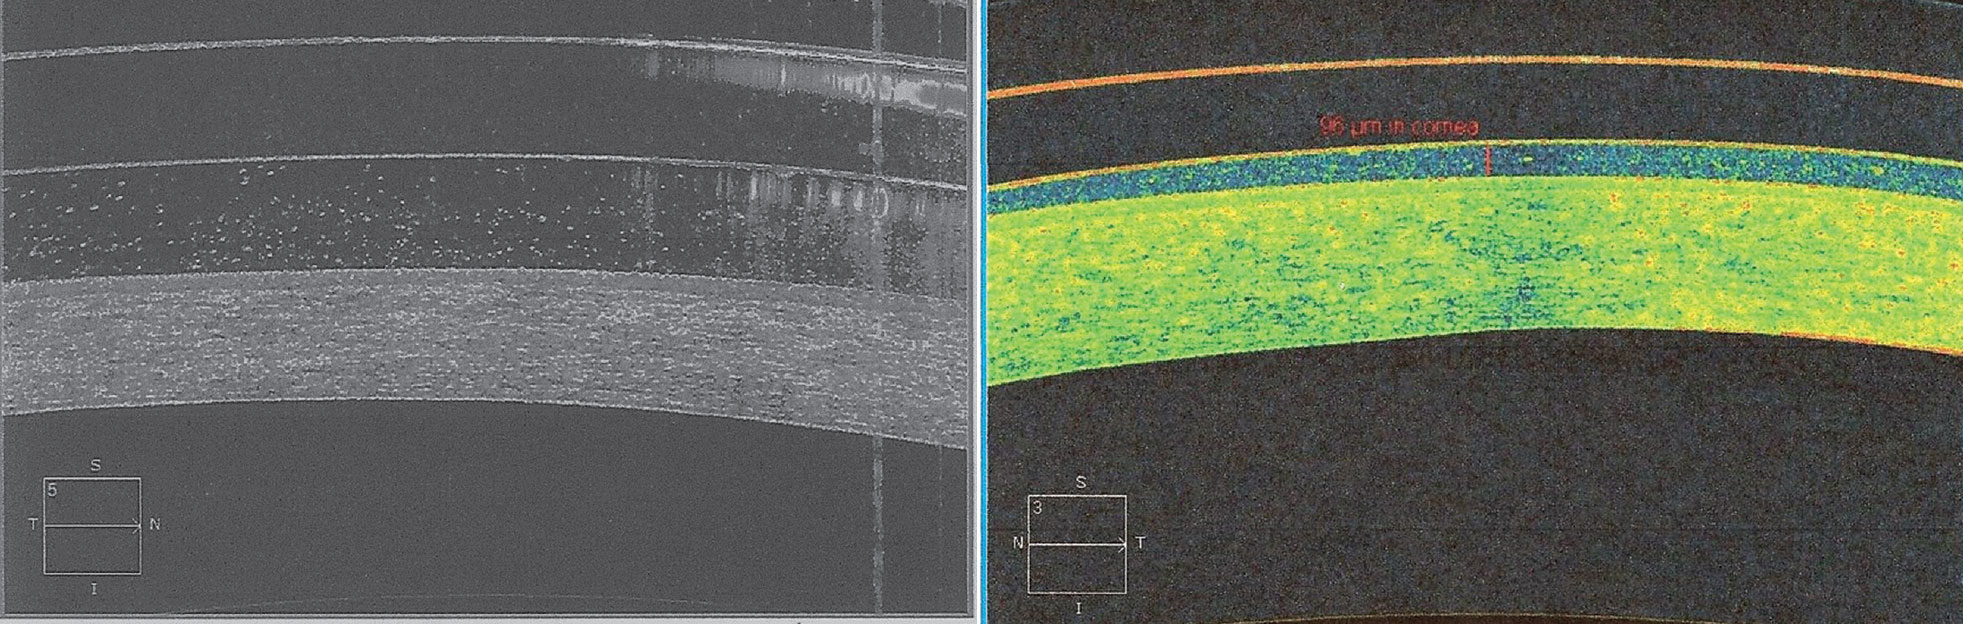 At left, OCT imaging of a scleral contact lens shows debris in the post-lens tear layer. Refitting this patient into a hybrid contact lens resulted in much less debris in the post-lens tear layer.